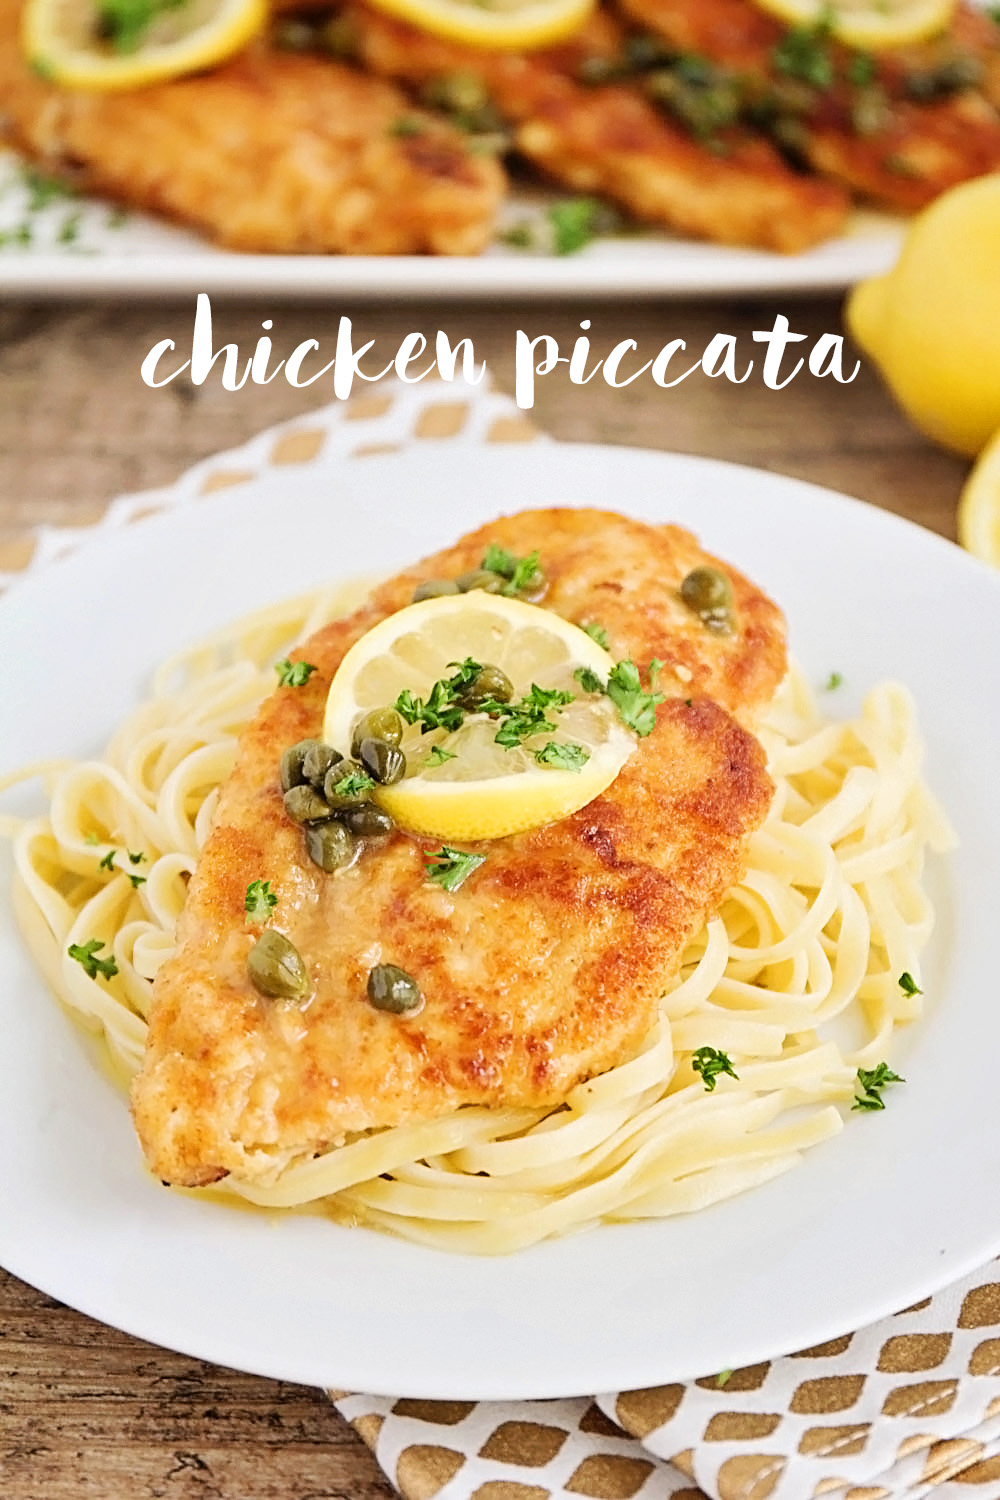 This delicious chicken piccata is ready in less than 30 minutes and super flavorful. The buttery lemon pan sauce is amazing!